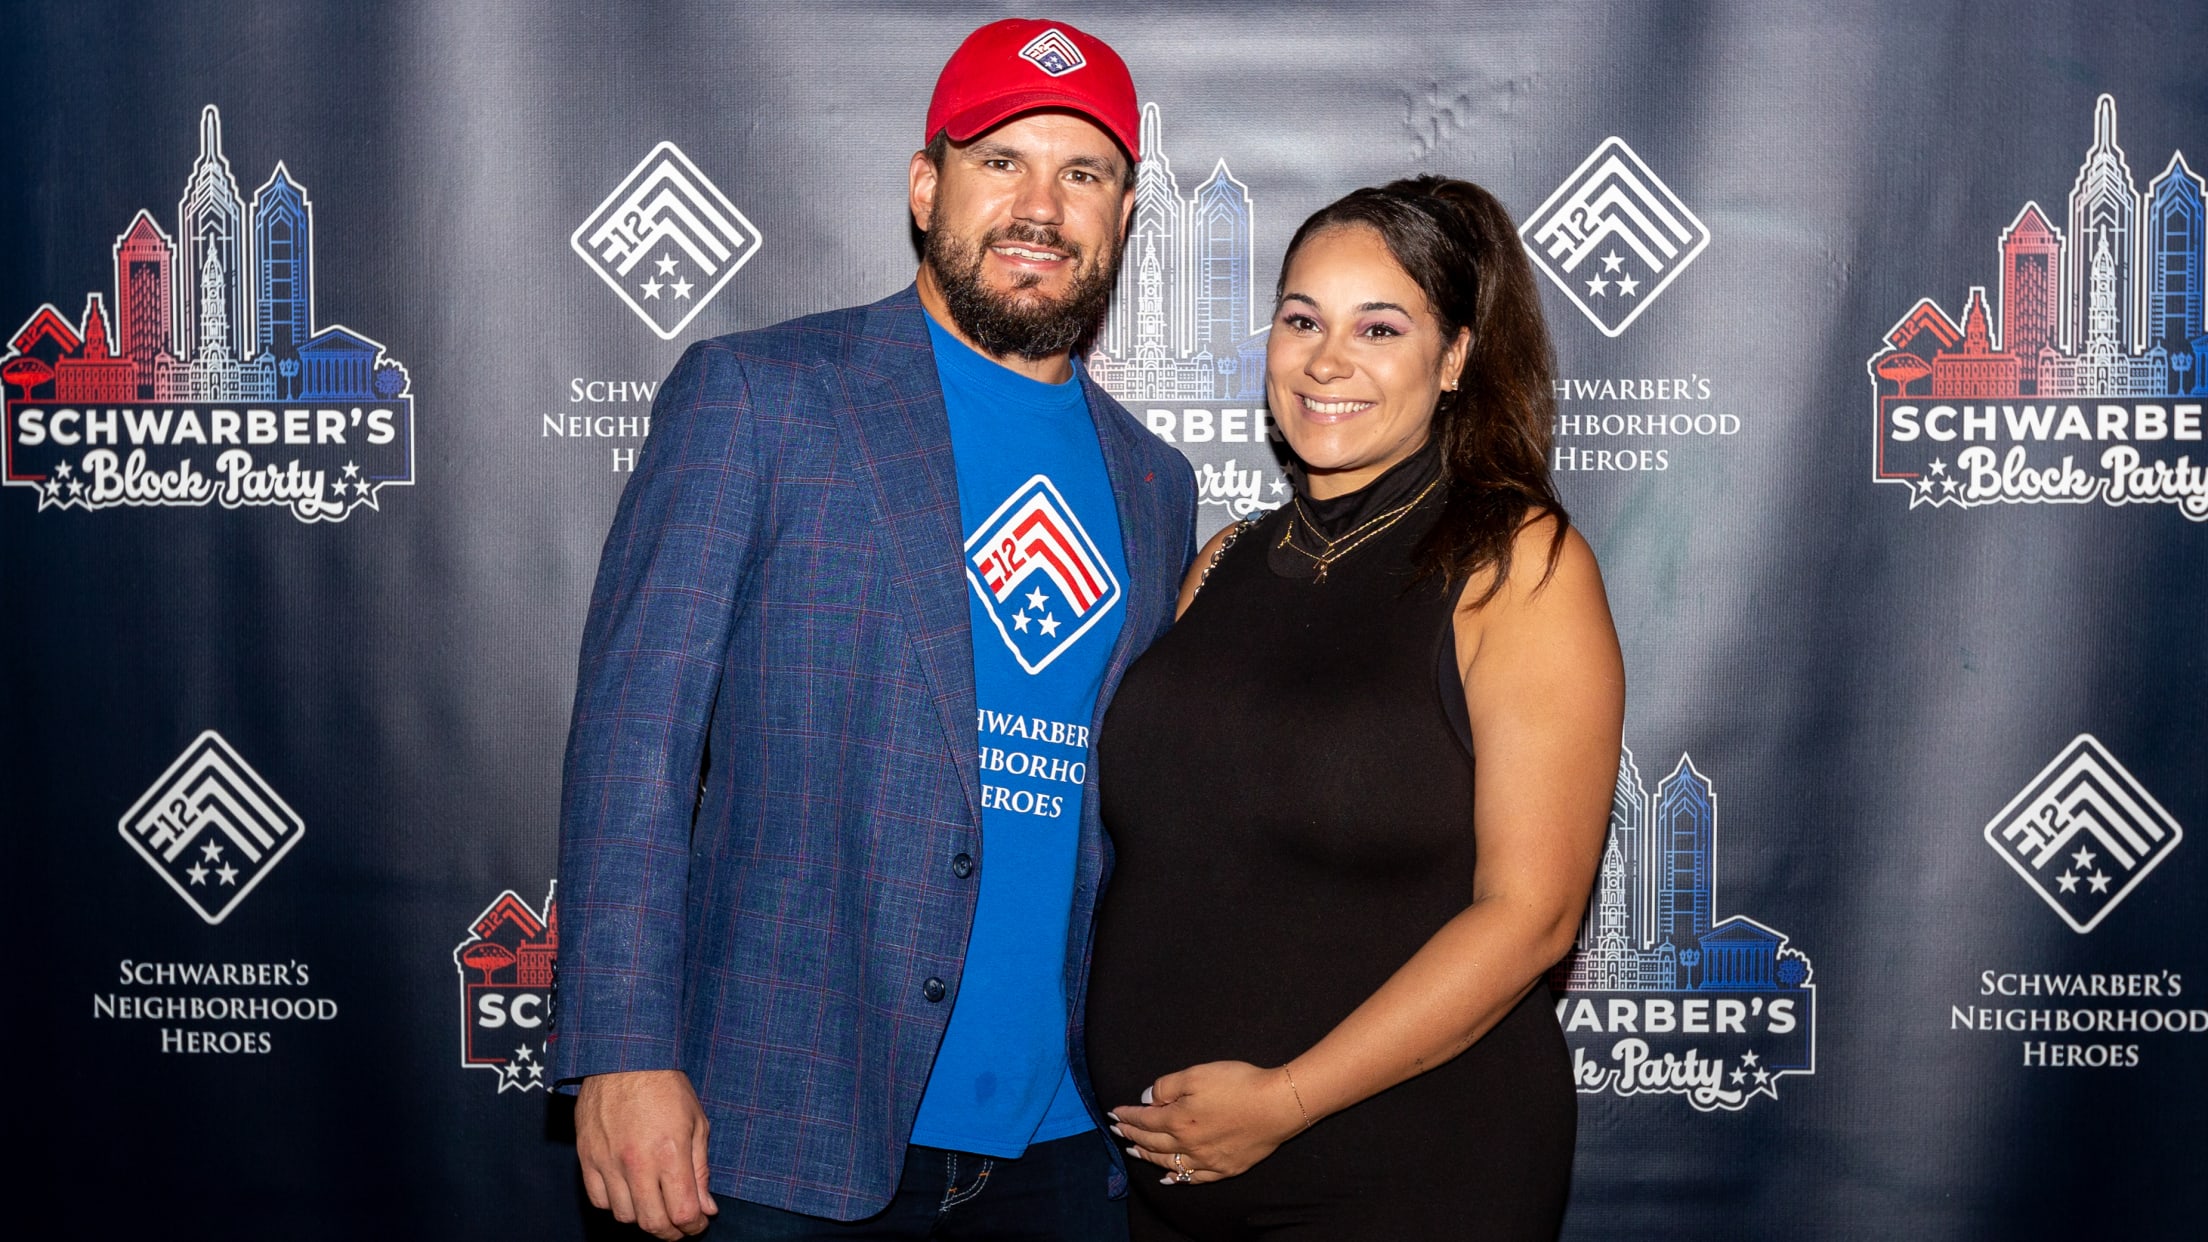 Kyle Schwarber on Instagram: My family and I are very excited to have The  Block Party come to Philly! Come out for a night of fun and help celebrate  our #NeighborhoodHeroes! Tickets